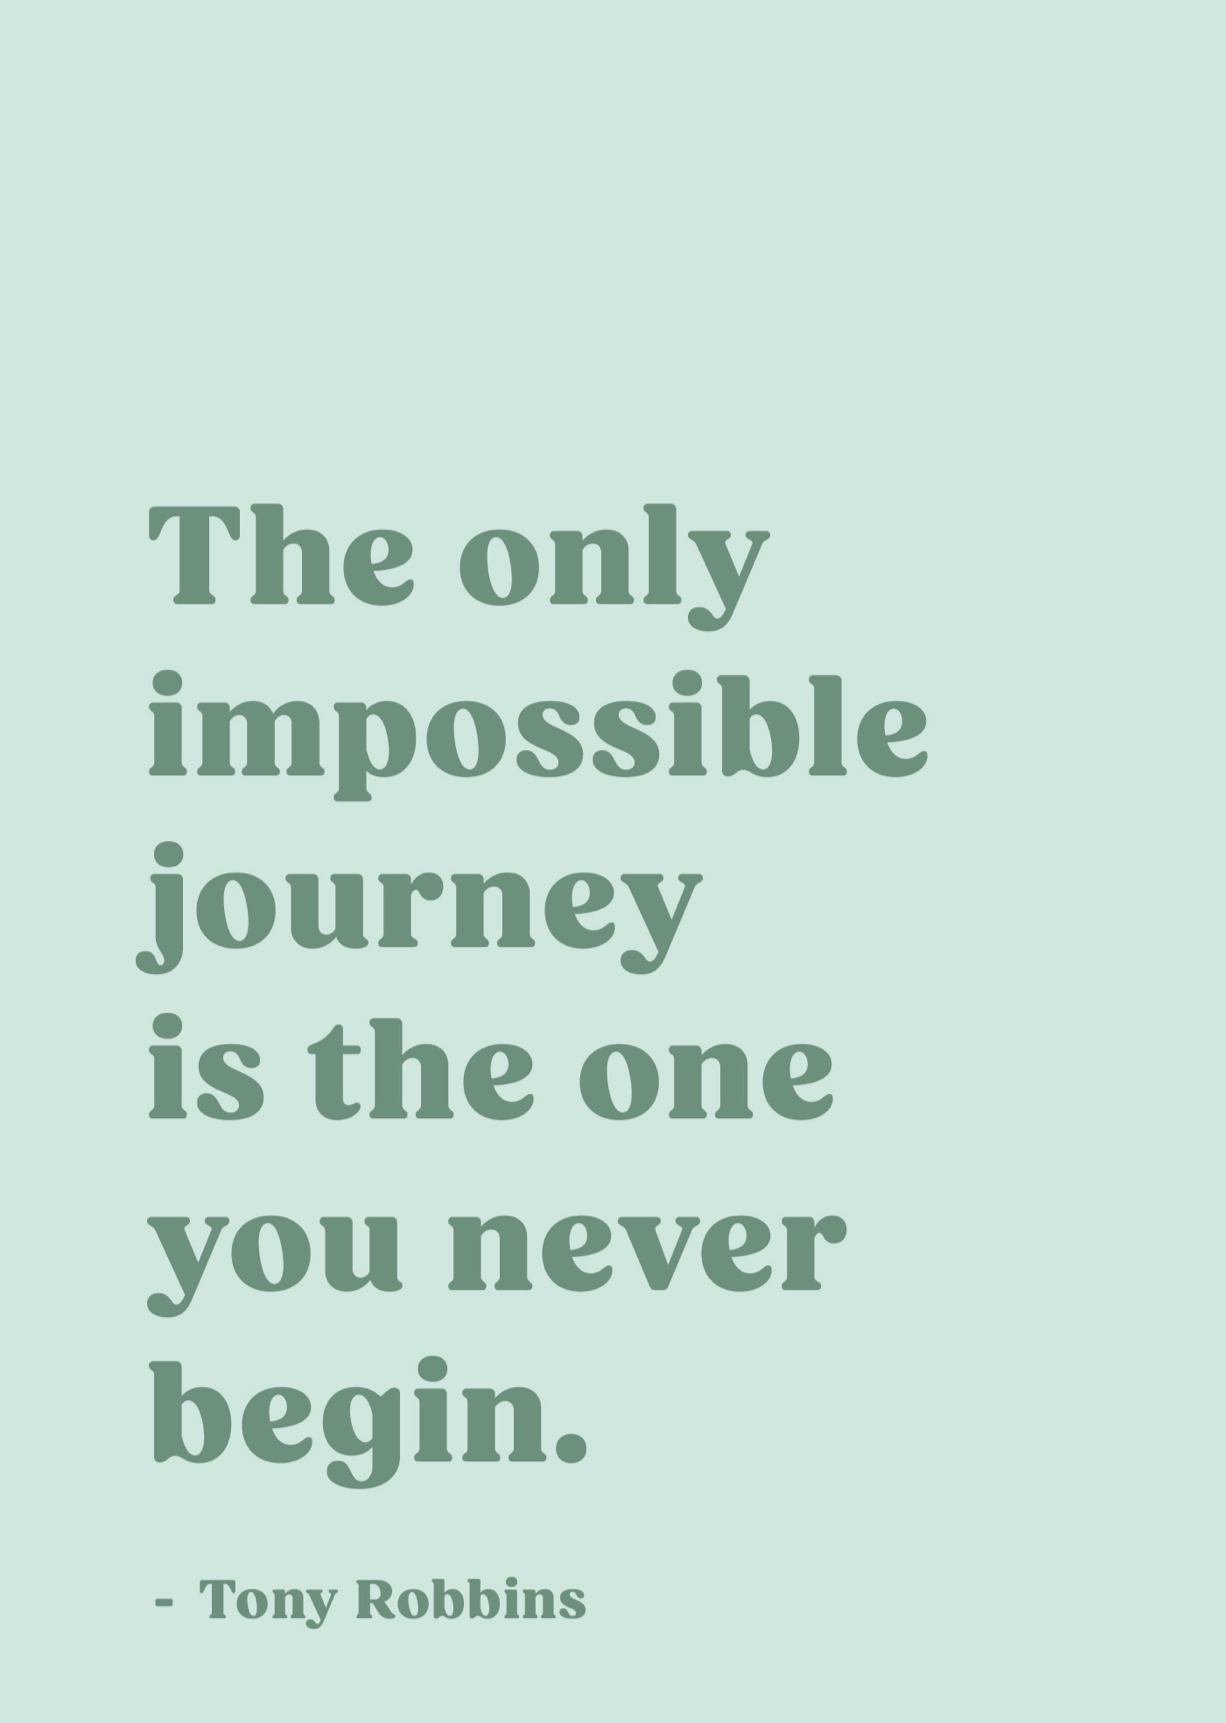 The only impossible journey - green